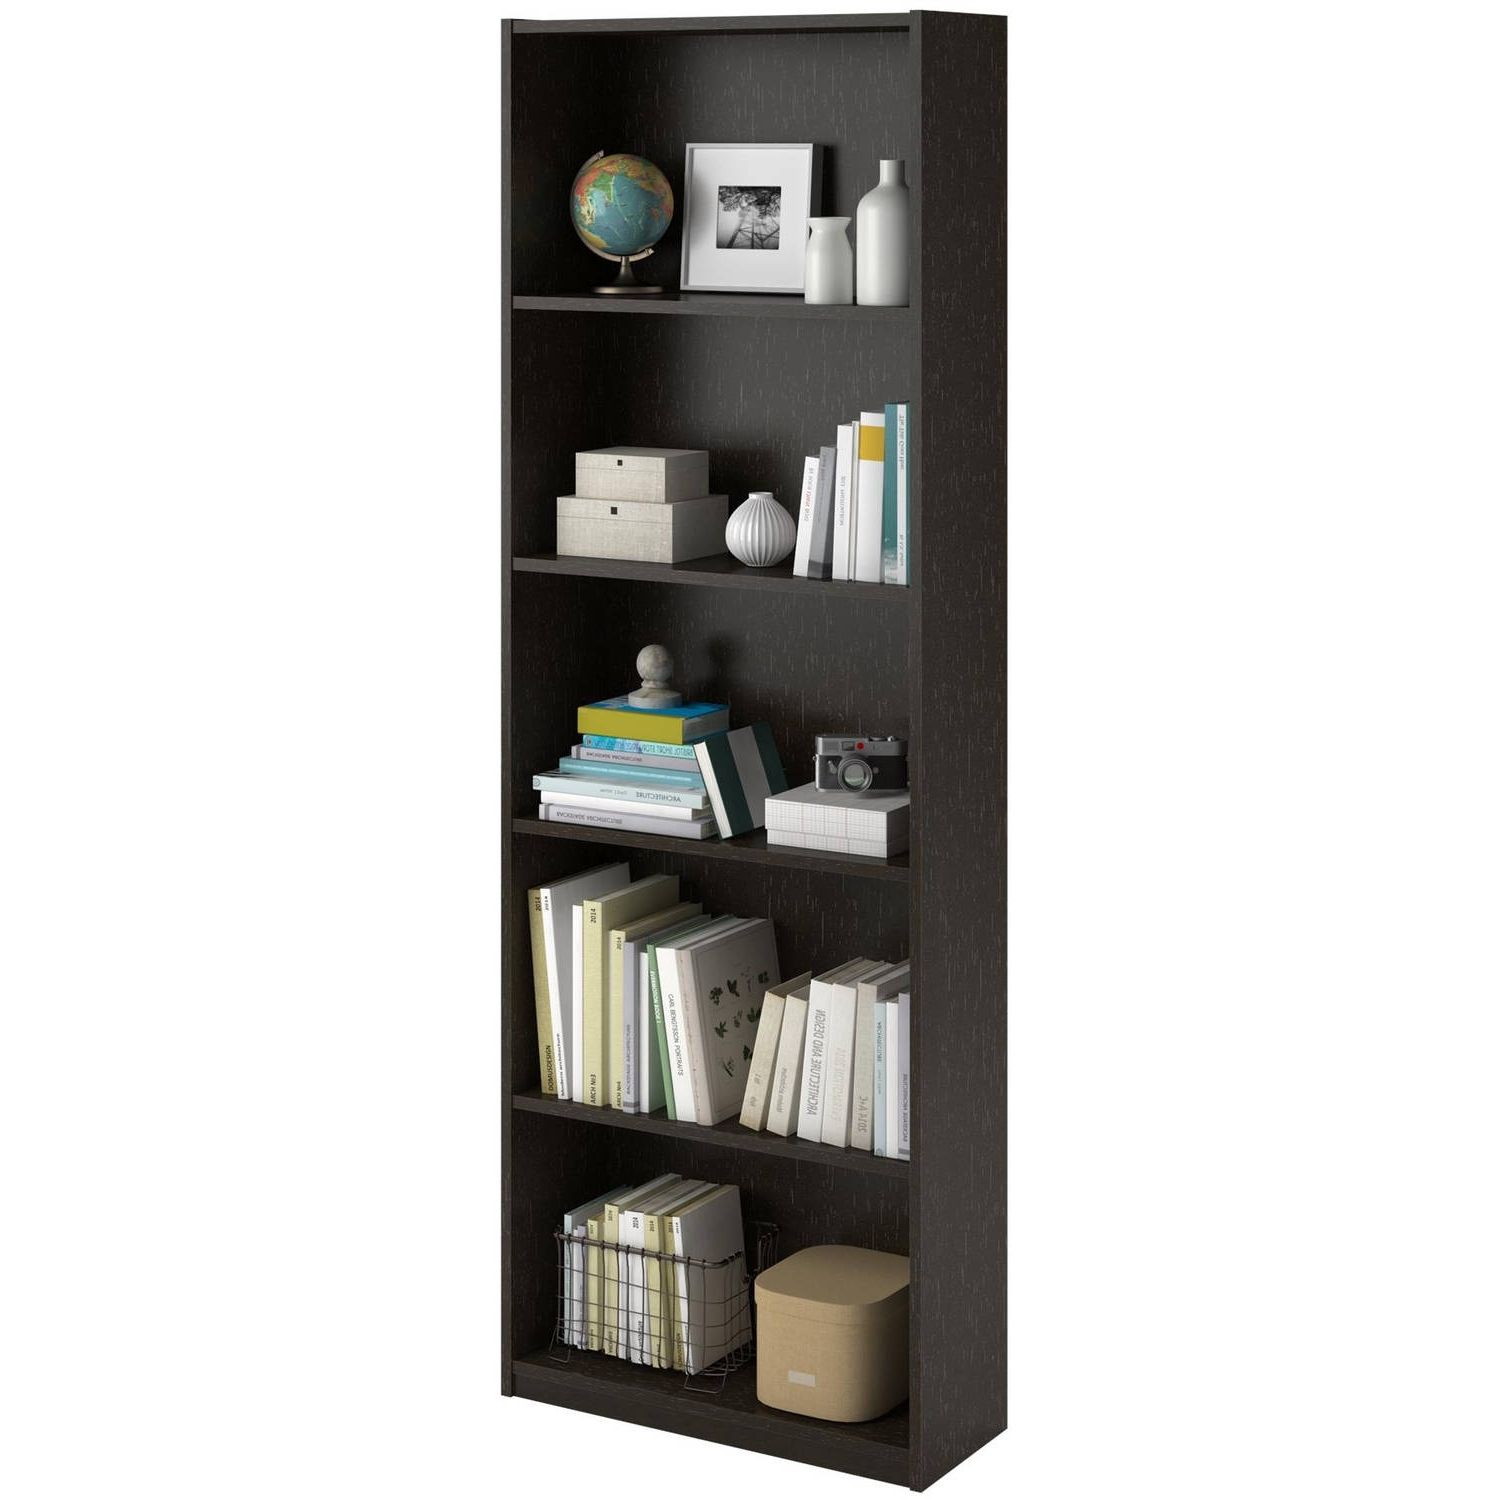 Ameriwood 5 Shelf Bookcases, Set Of 2 (mix And Match) – Walmart With Regard To Popular Room Essentials 5 Shelf Bookcases (View 1 of 15)